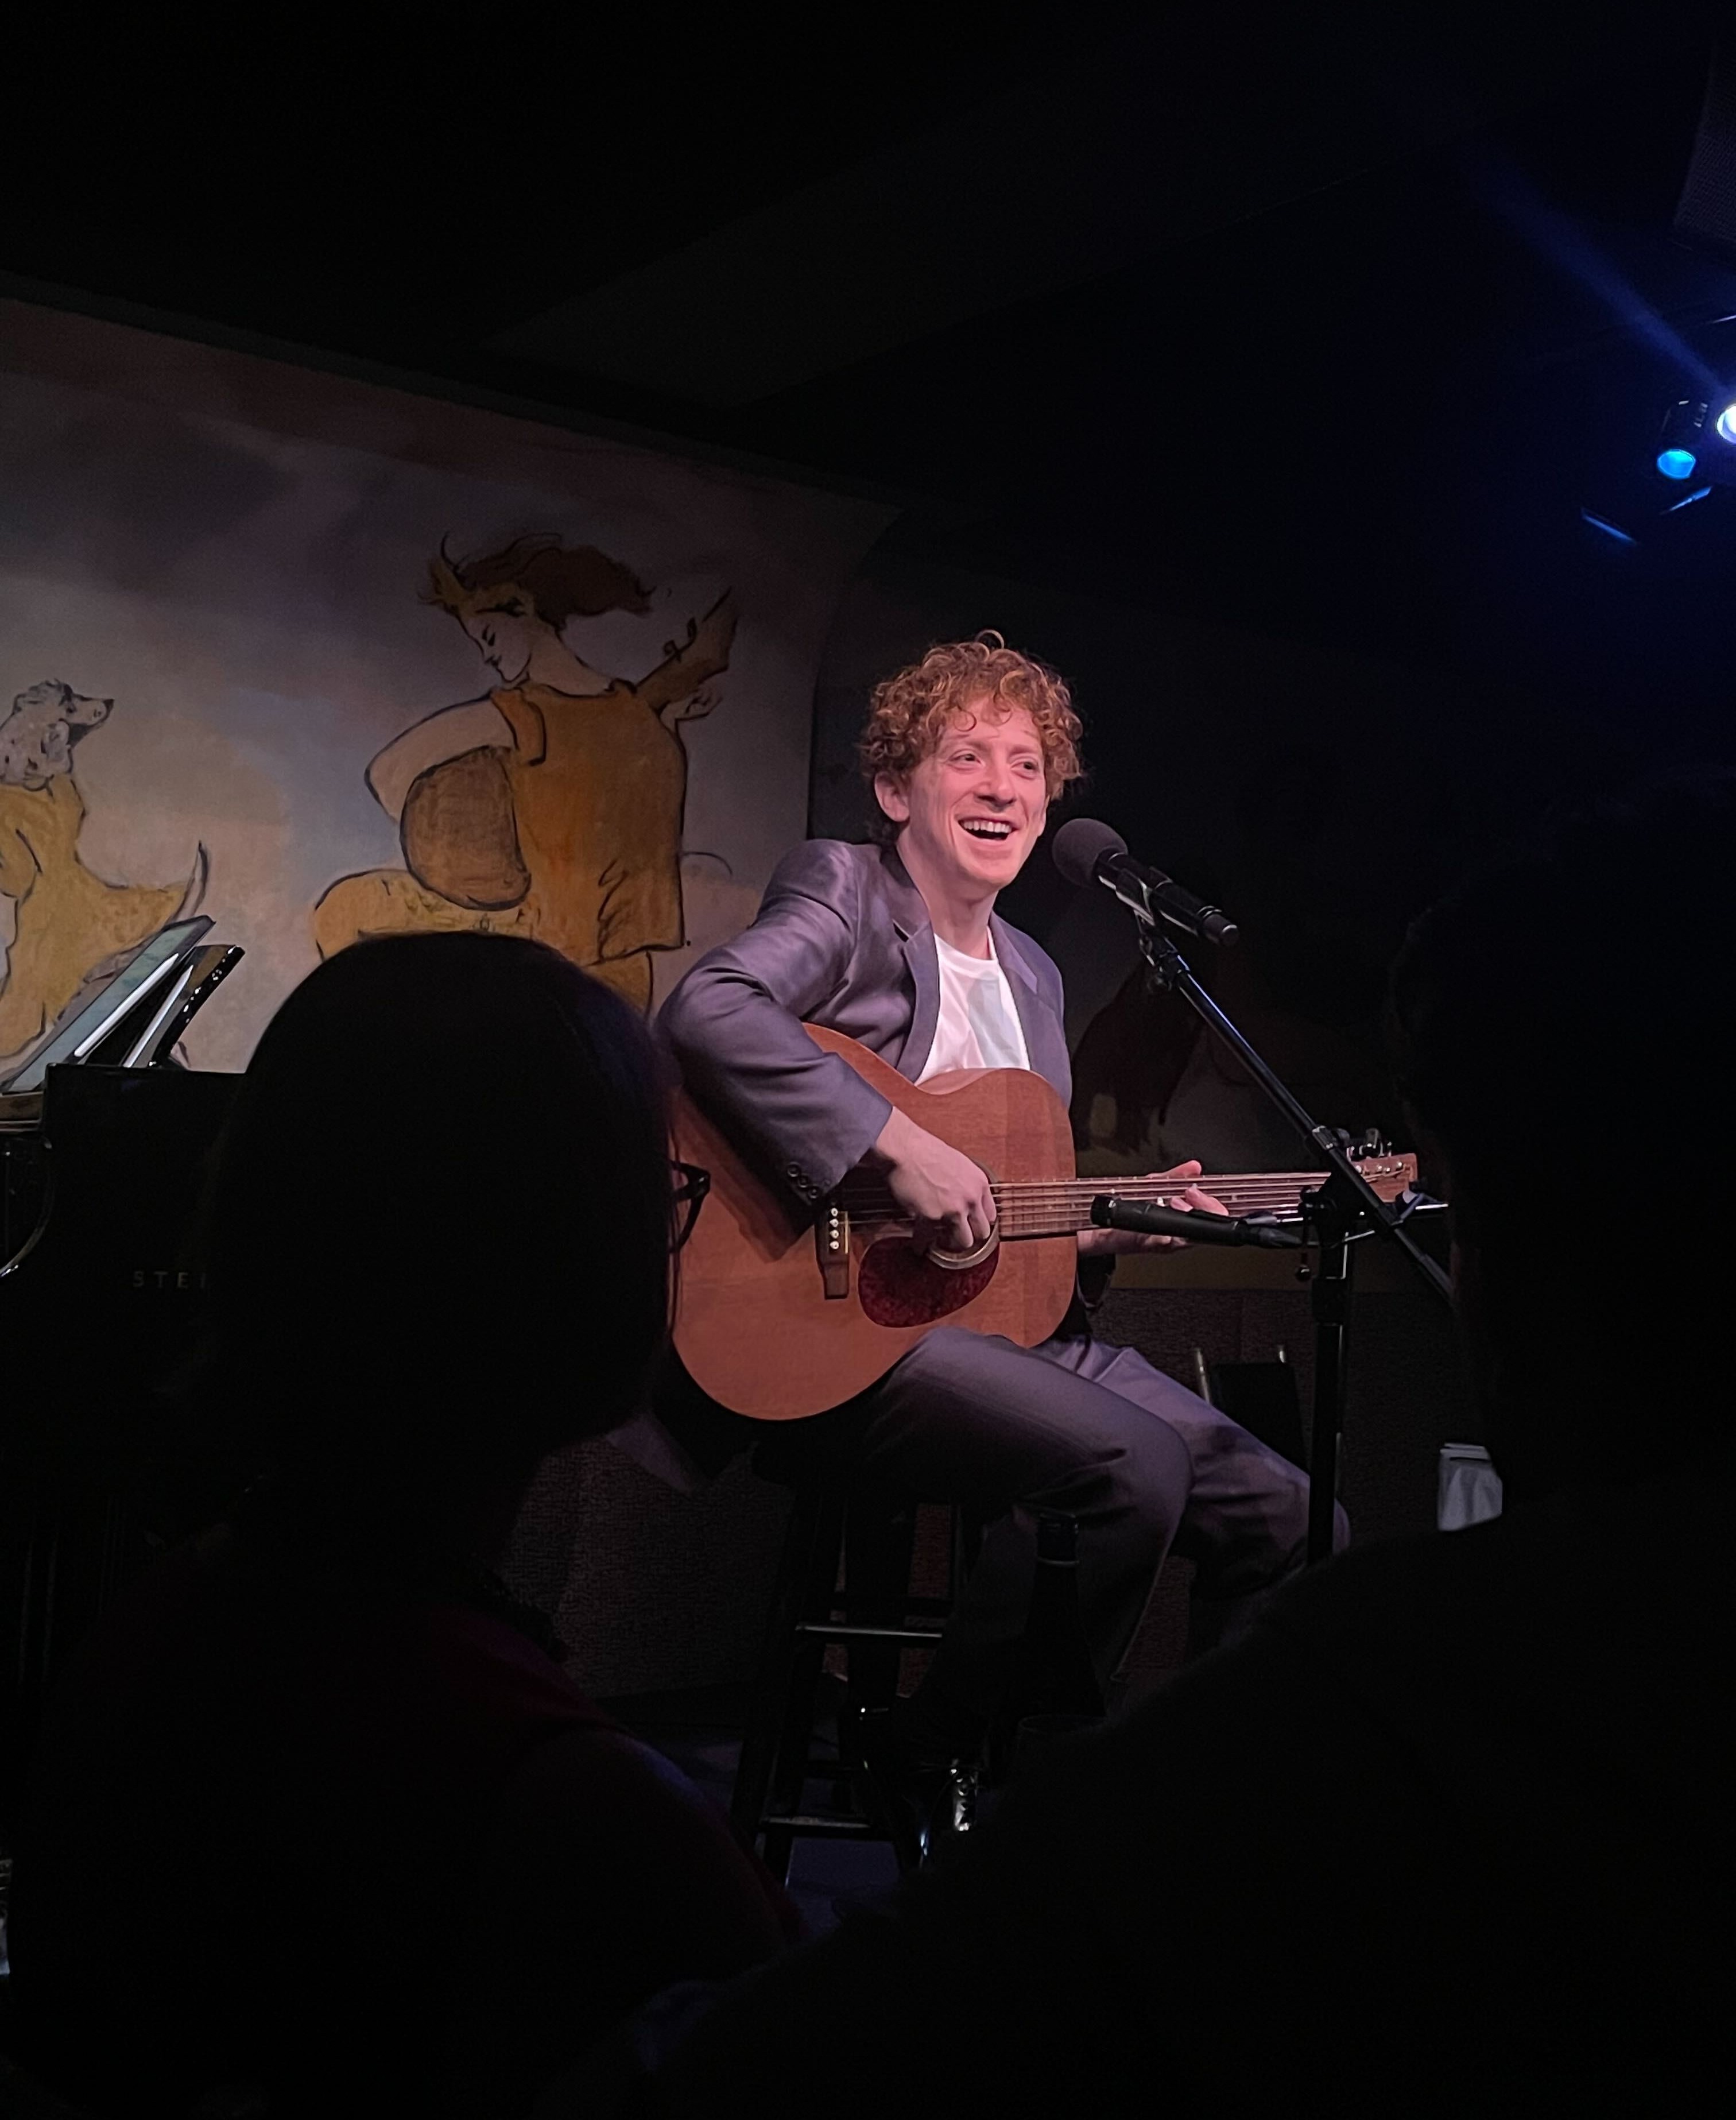 Ethan gave a nod to Wicked during his Café Carlyle performance on May 28